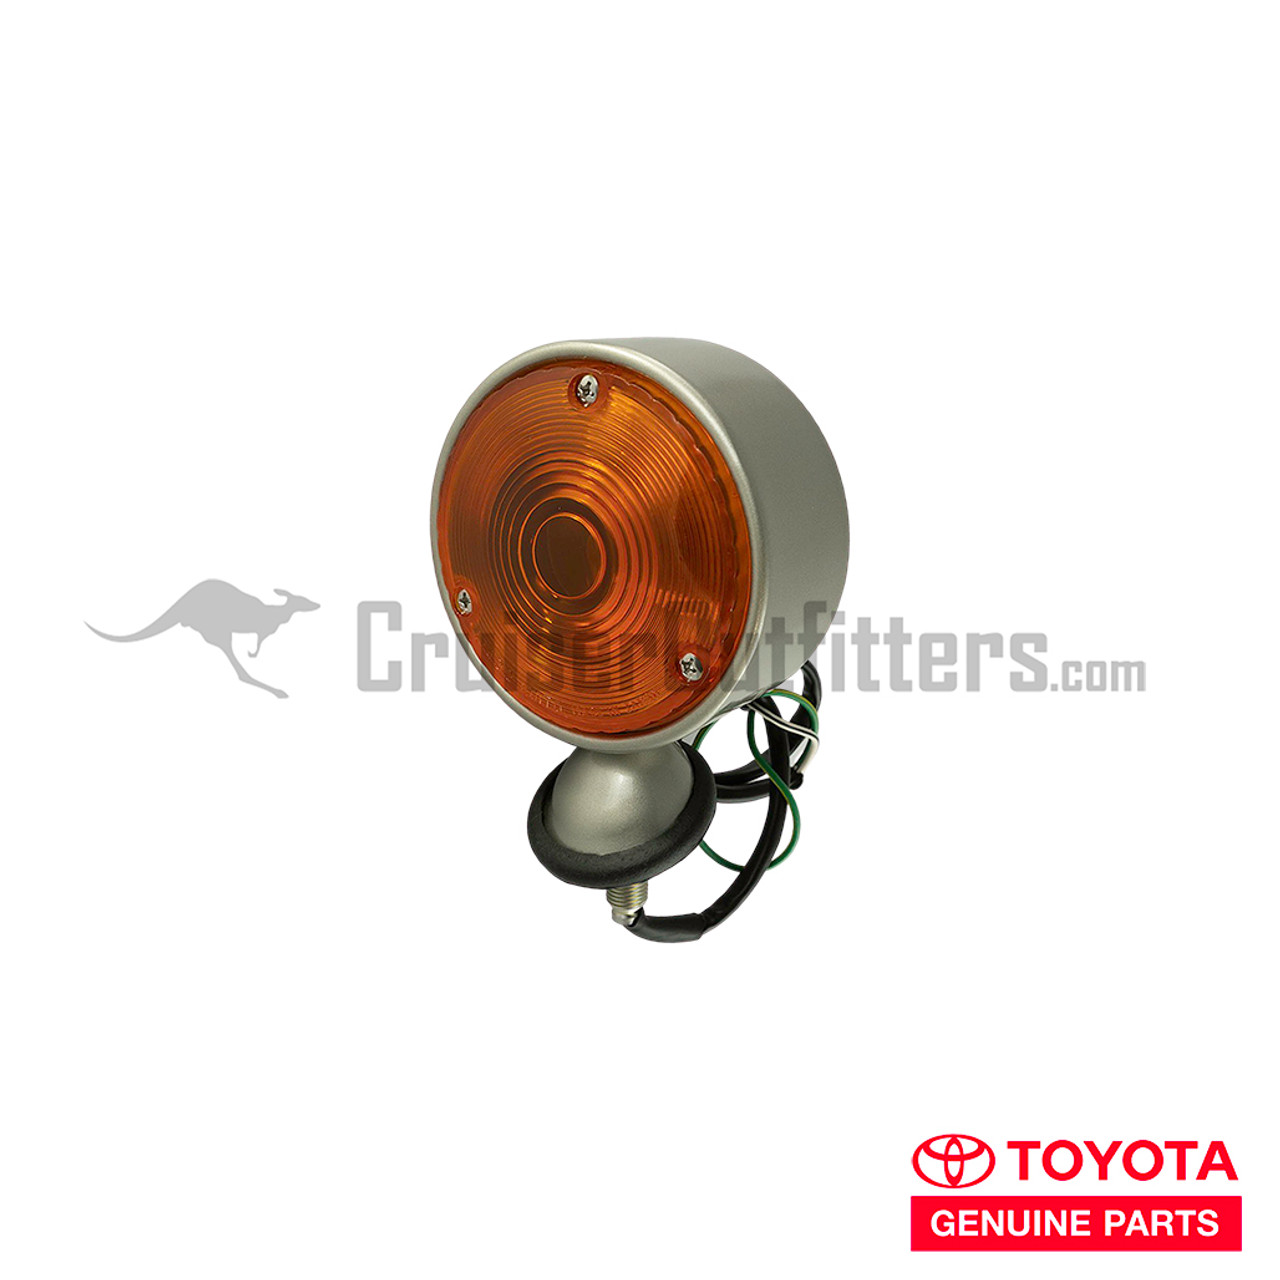 Front Turn Signal Assembly - OEM Toyota - Fits (LT60040)